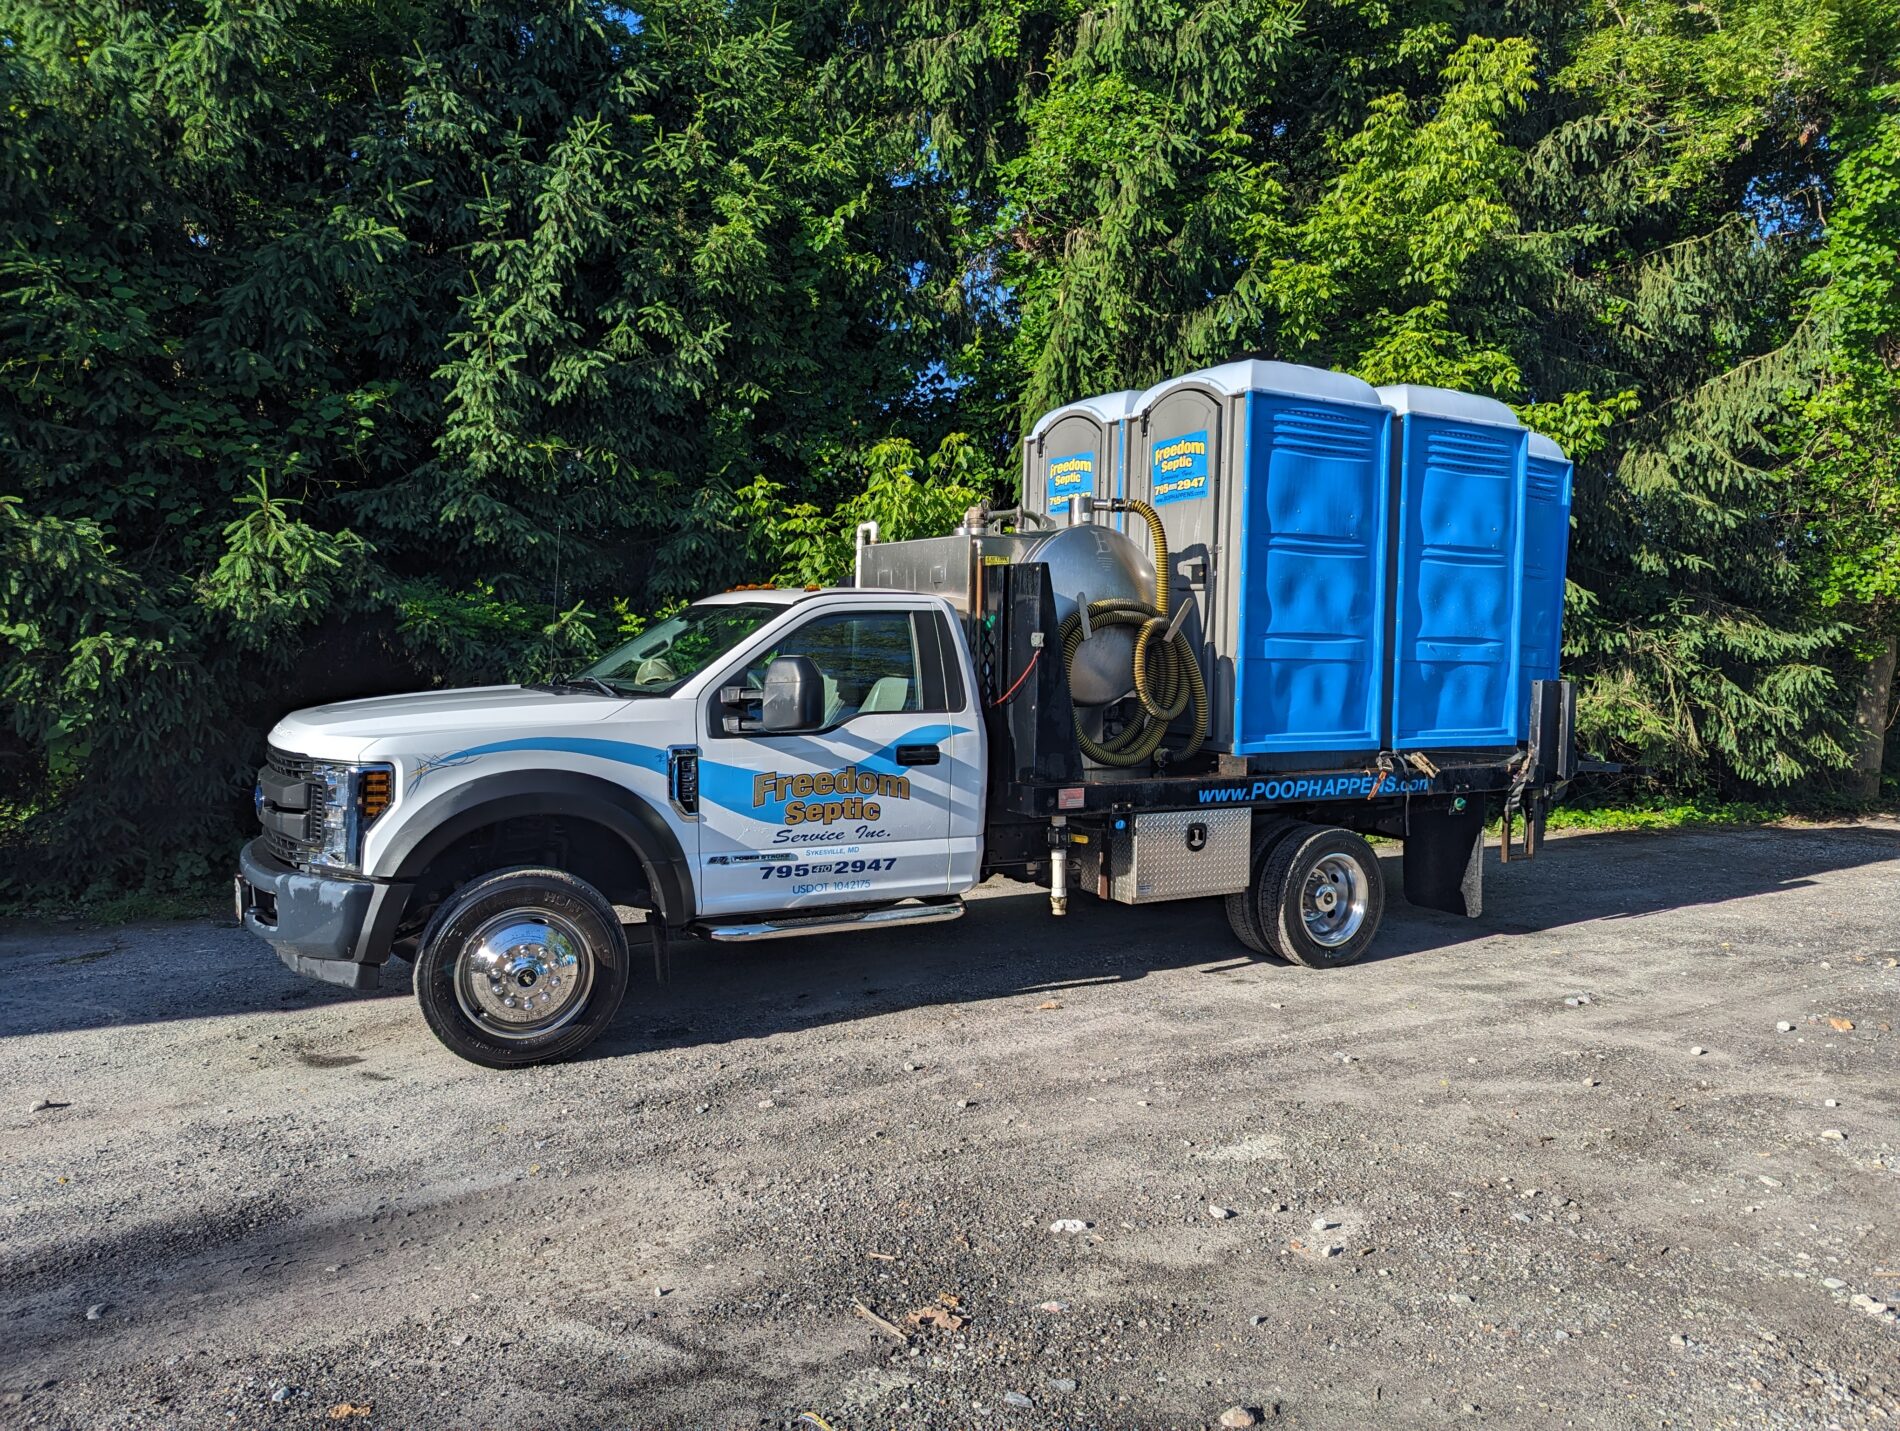 A truck with two portable toilets on the back is parked on a gravel surface in front of a wooded area. The truck has a company logo and contact information on its side.